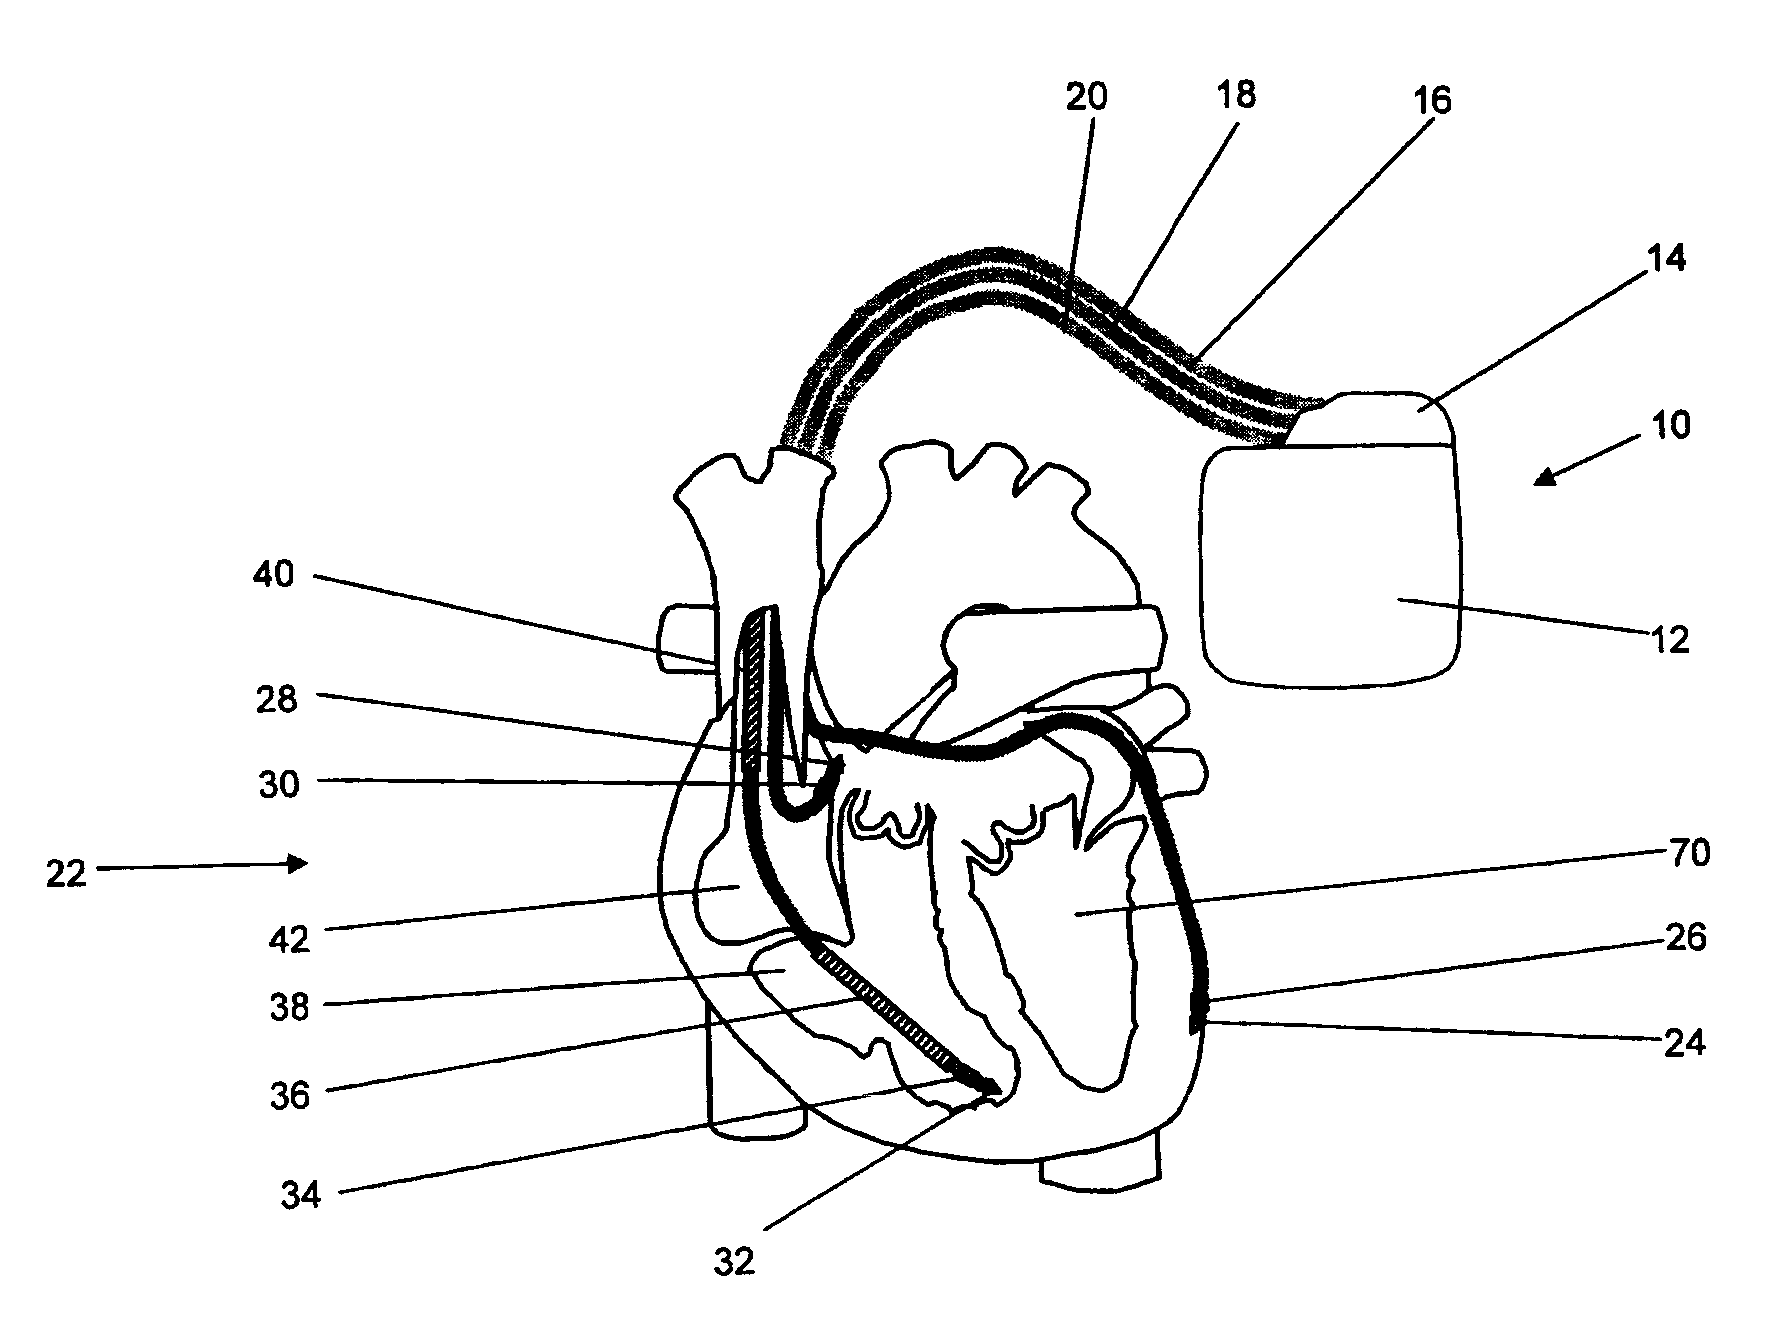 Implantable medical device and method for lv coronary sinus lead implant site optimization